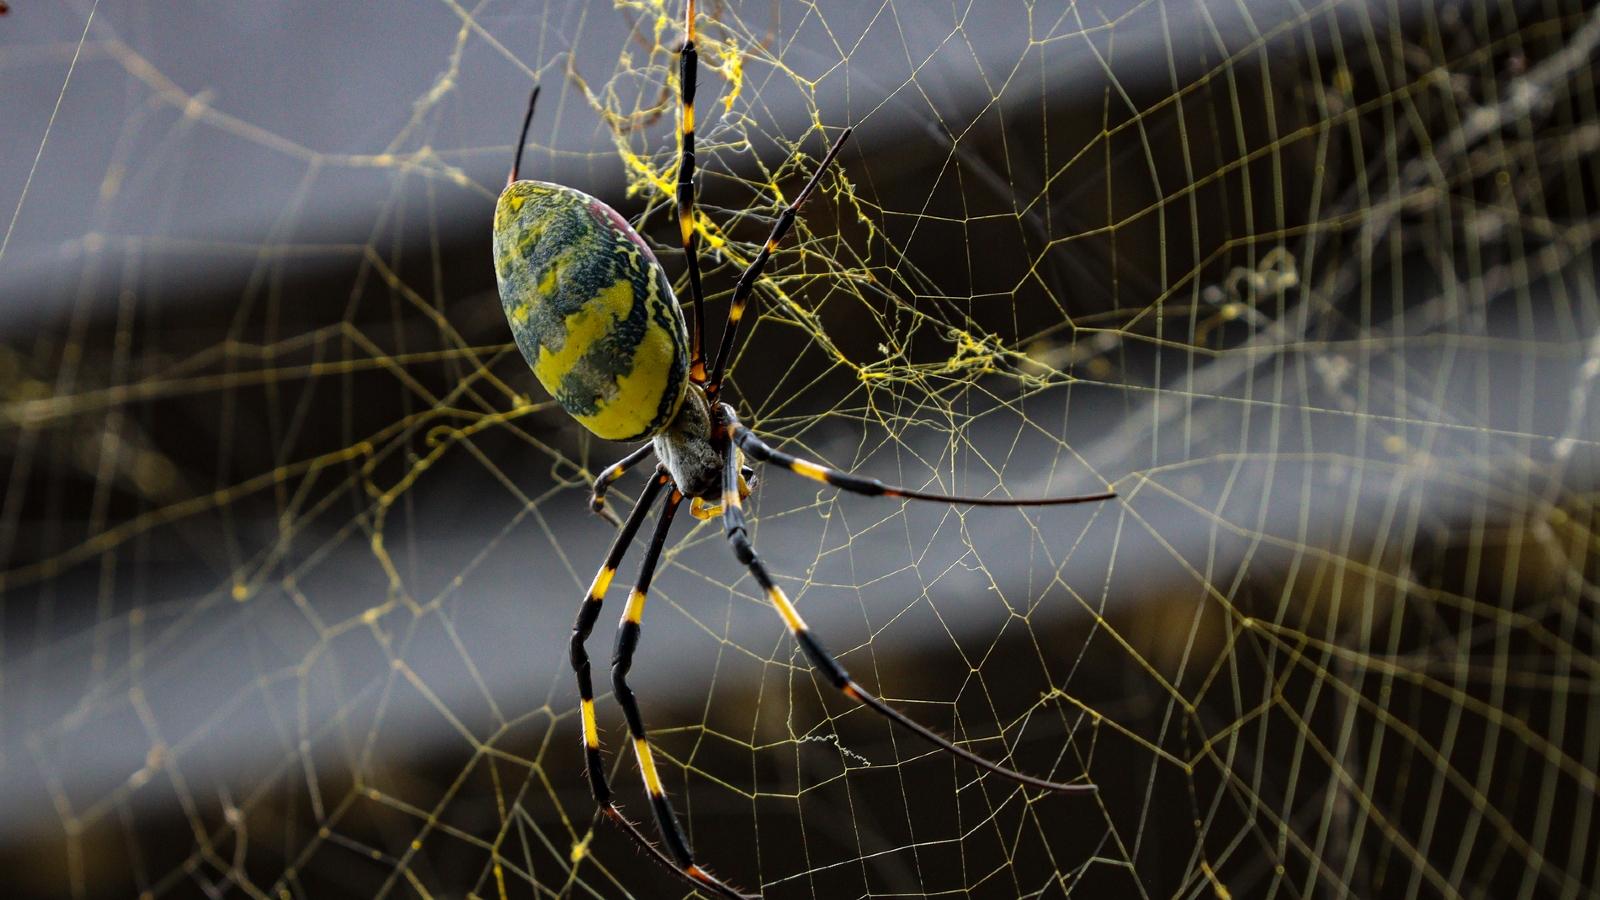 Giant, invasive Joro spiders with 6-foot webs could be poised to